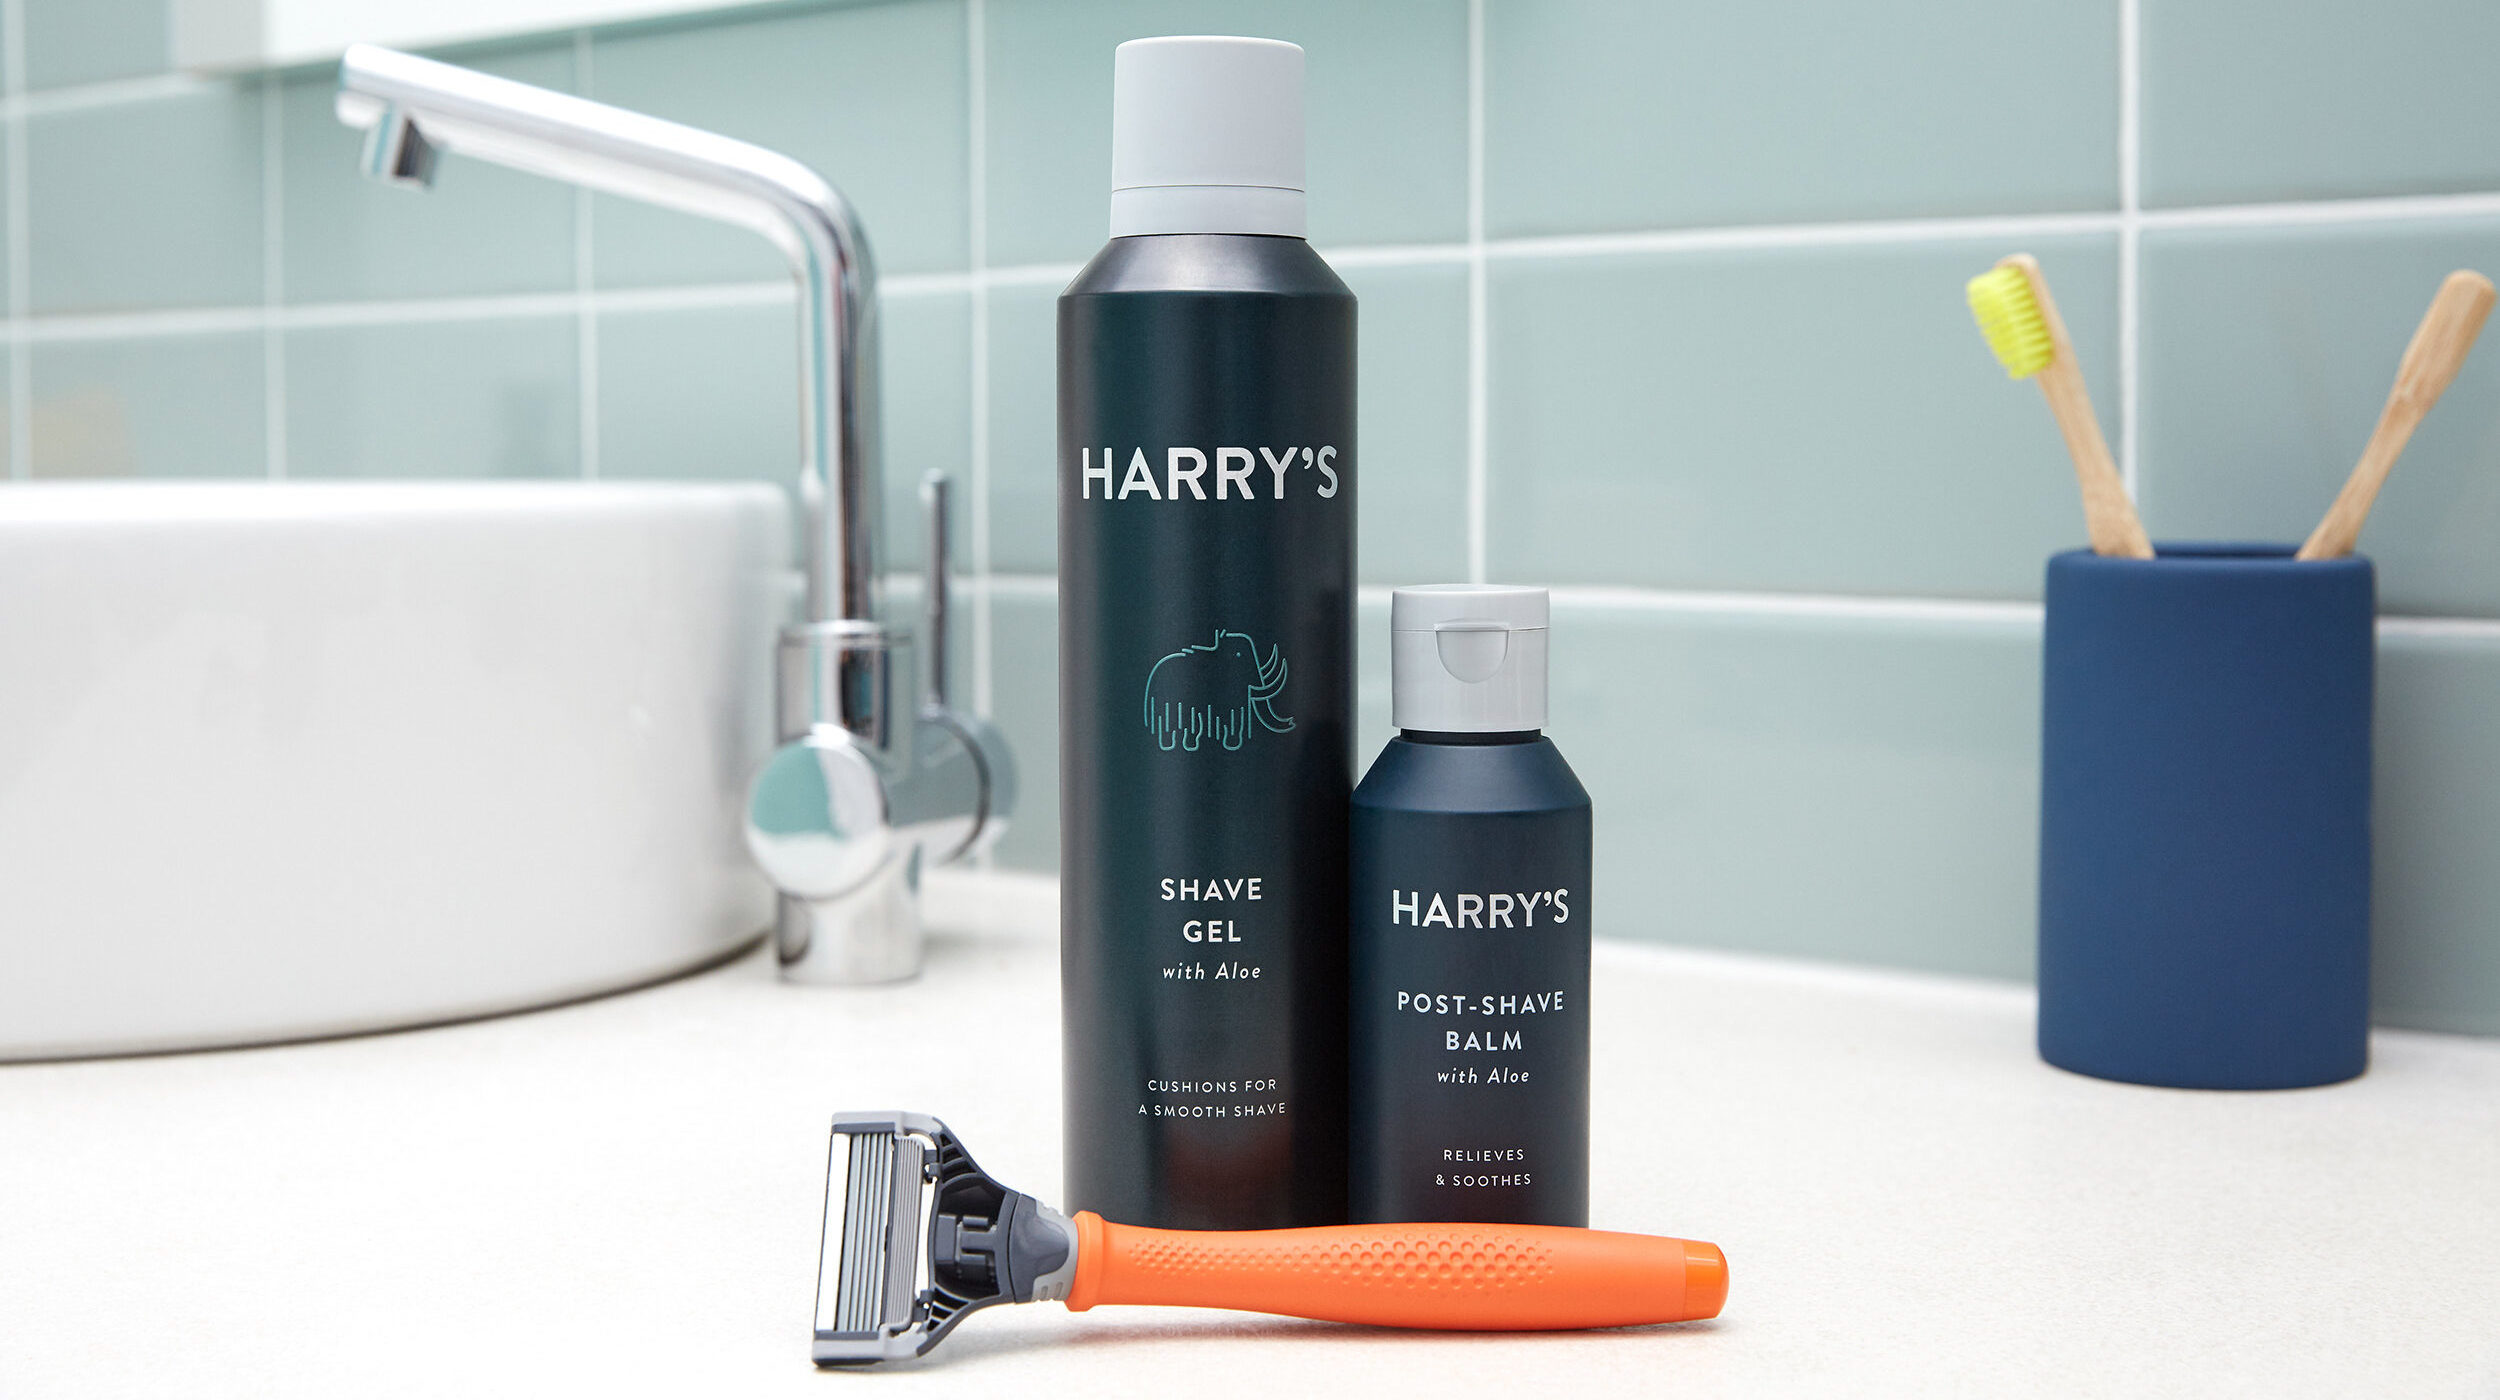 Harry’s achieves scale while remaining  40% below target CPAs with Rokt Ads